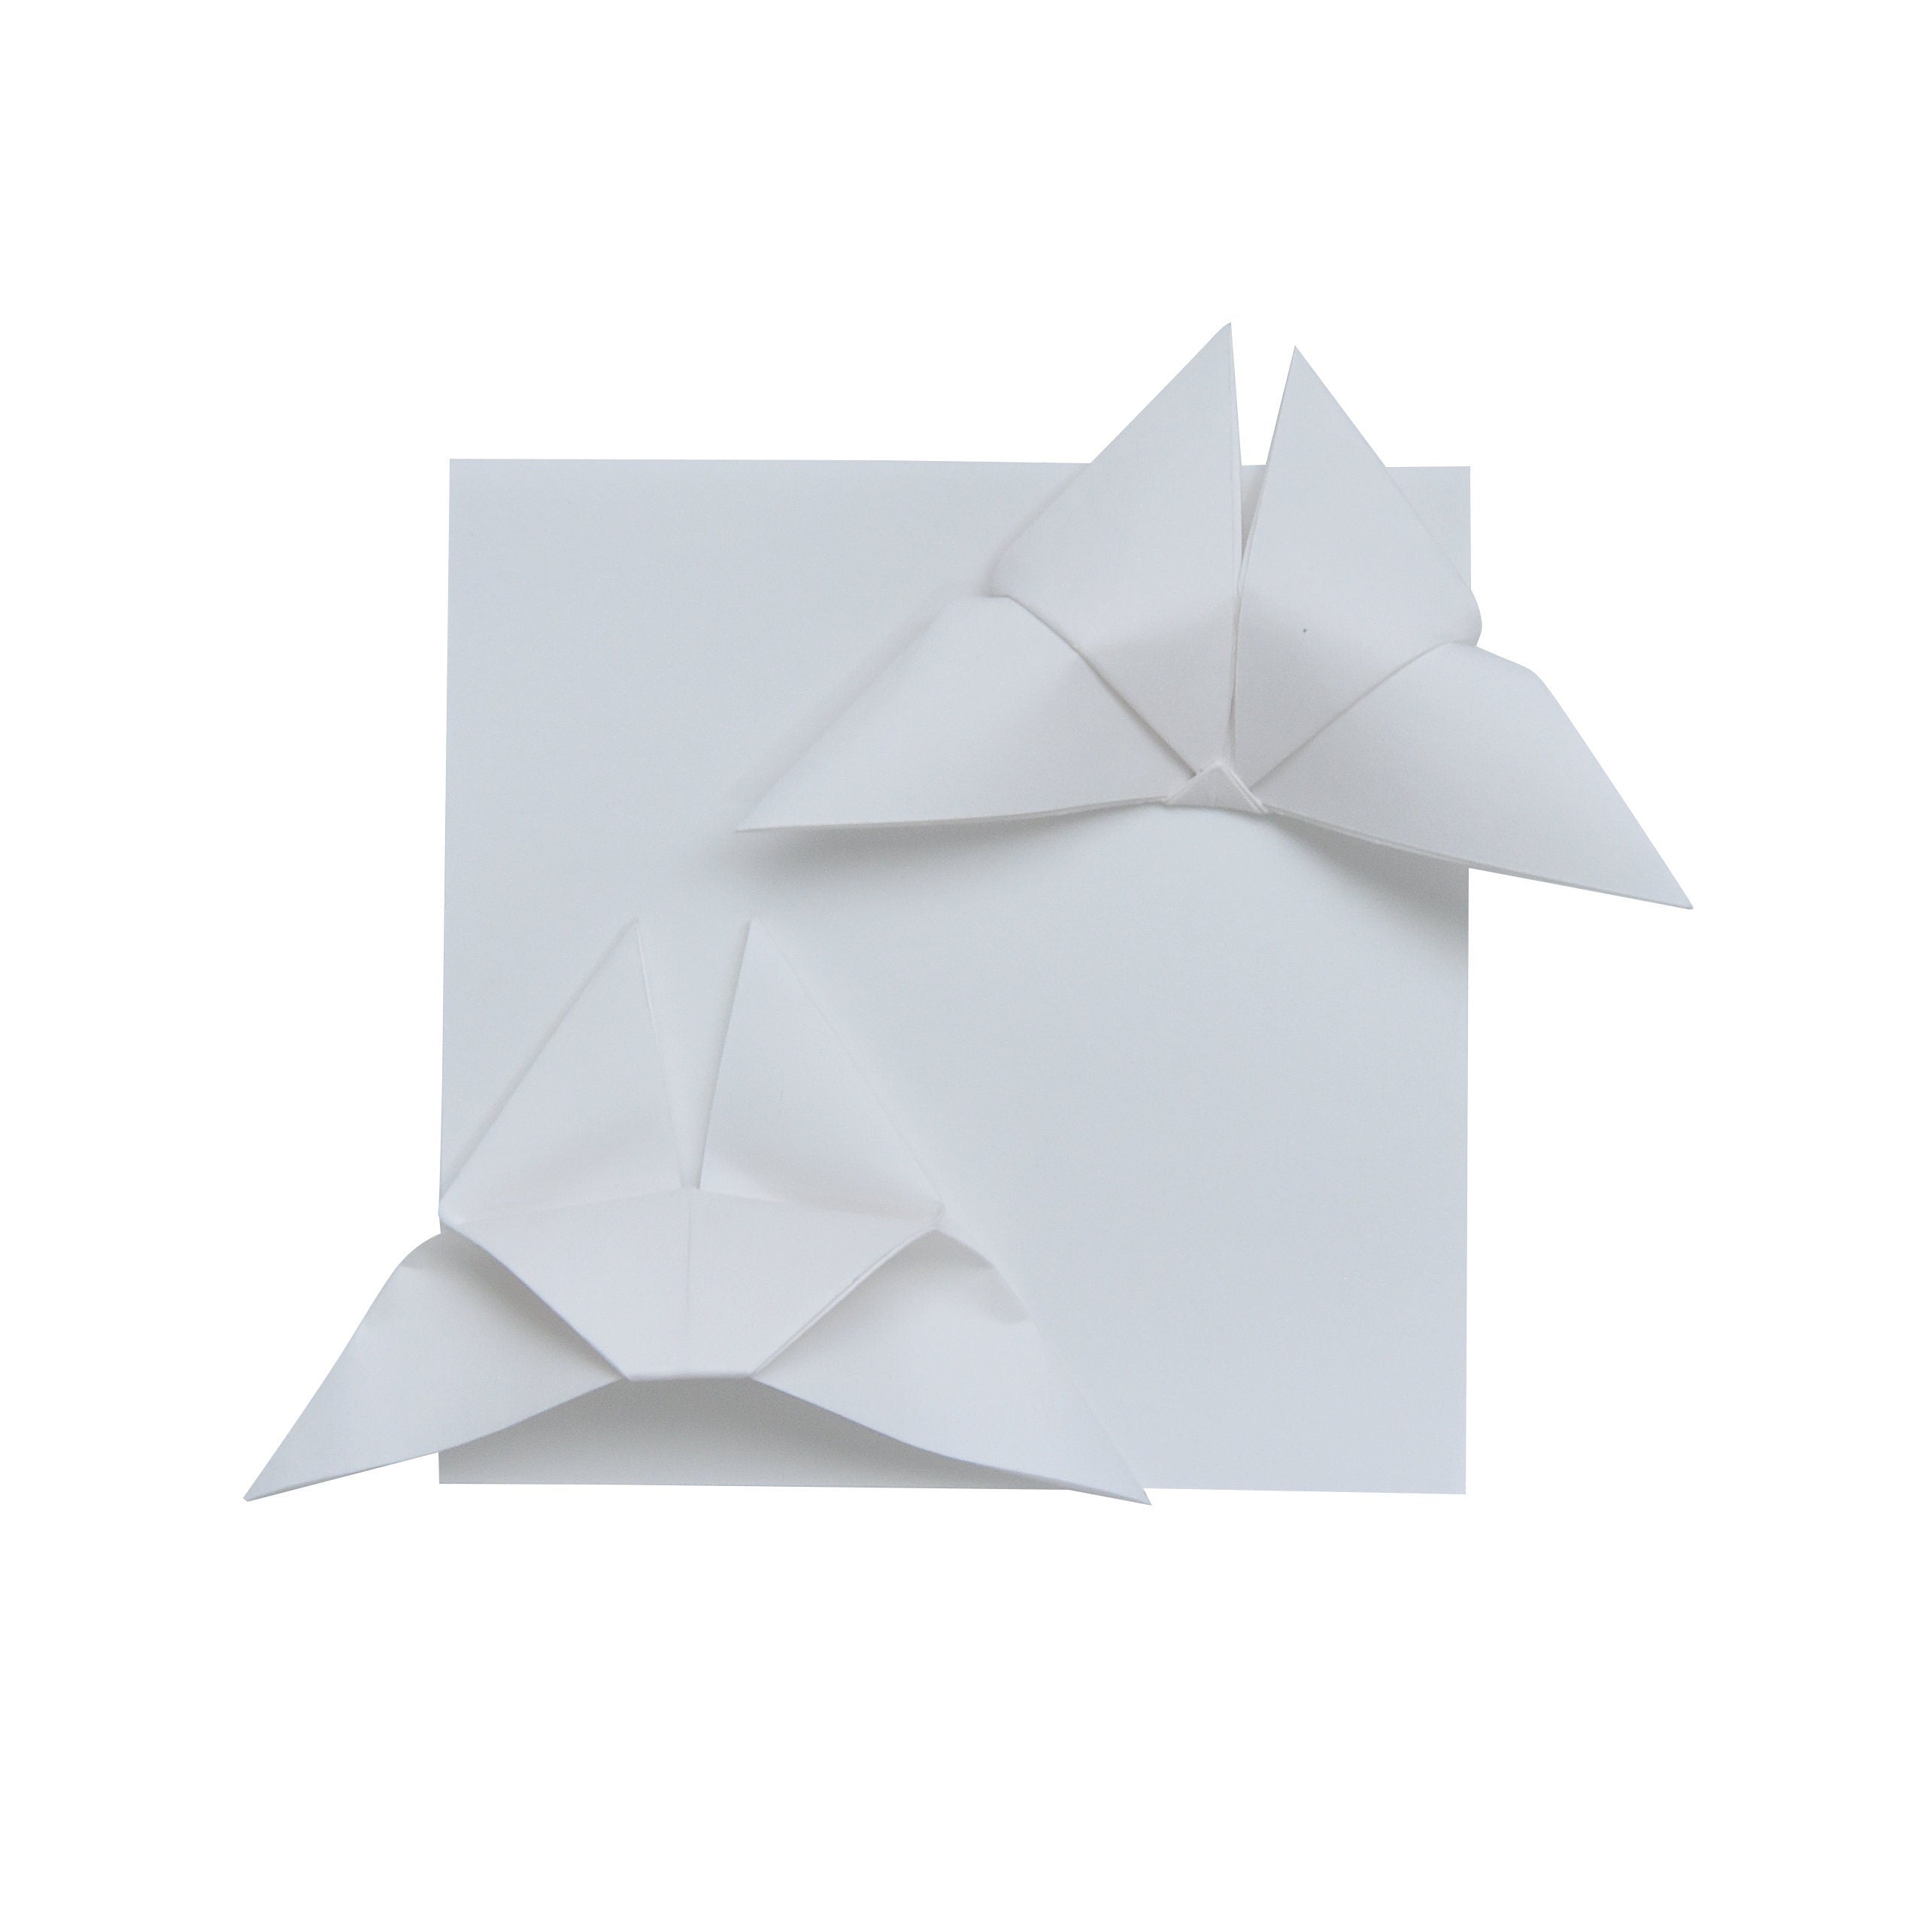 100 Ivory Origami Paper Sheets Large 6x6 inches for Folding Paper, Origami Cranes, Origami Decoration